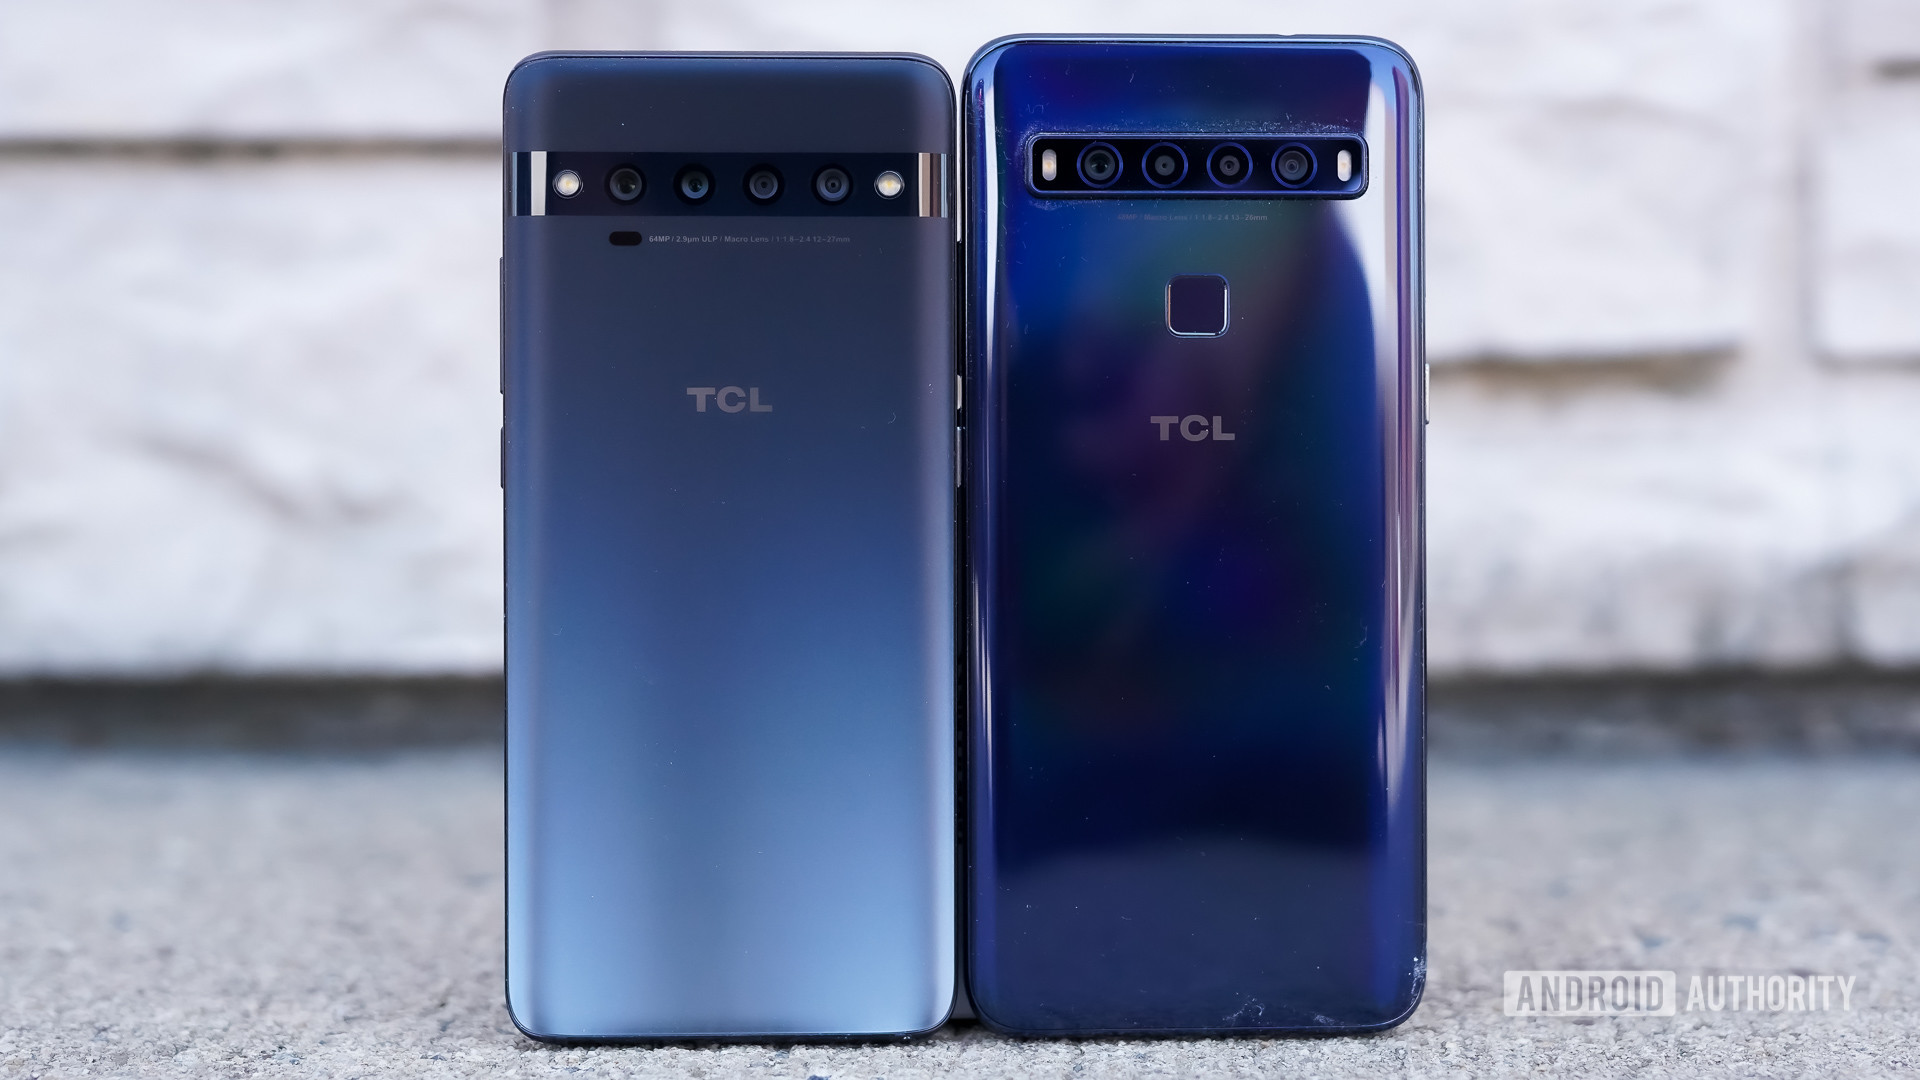 TCL 10 Pro and 10L standing together